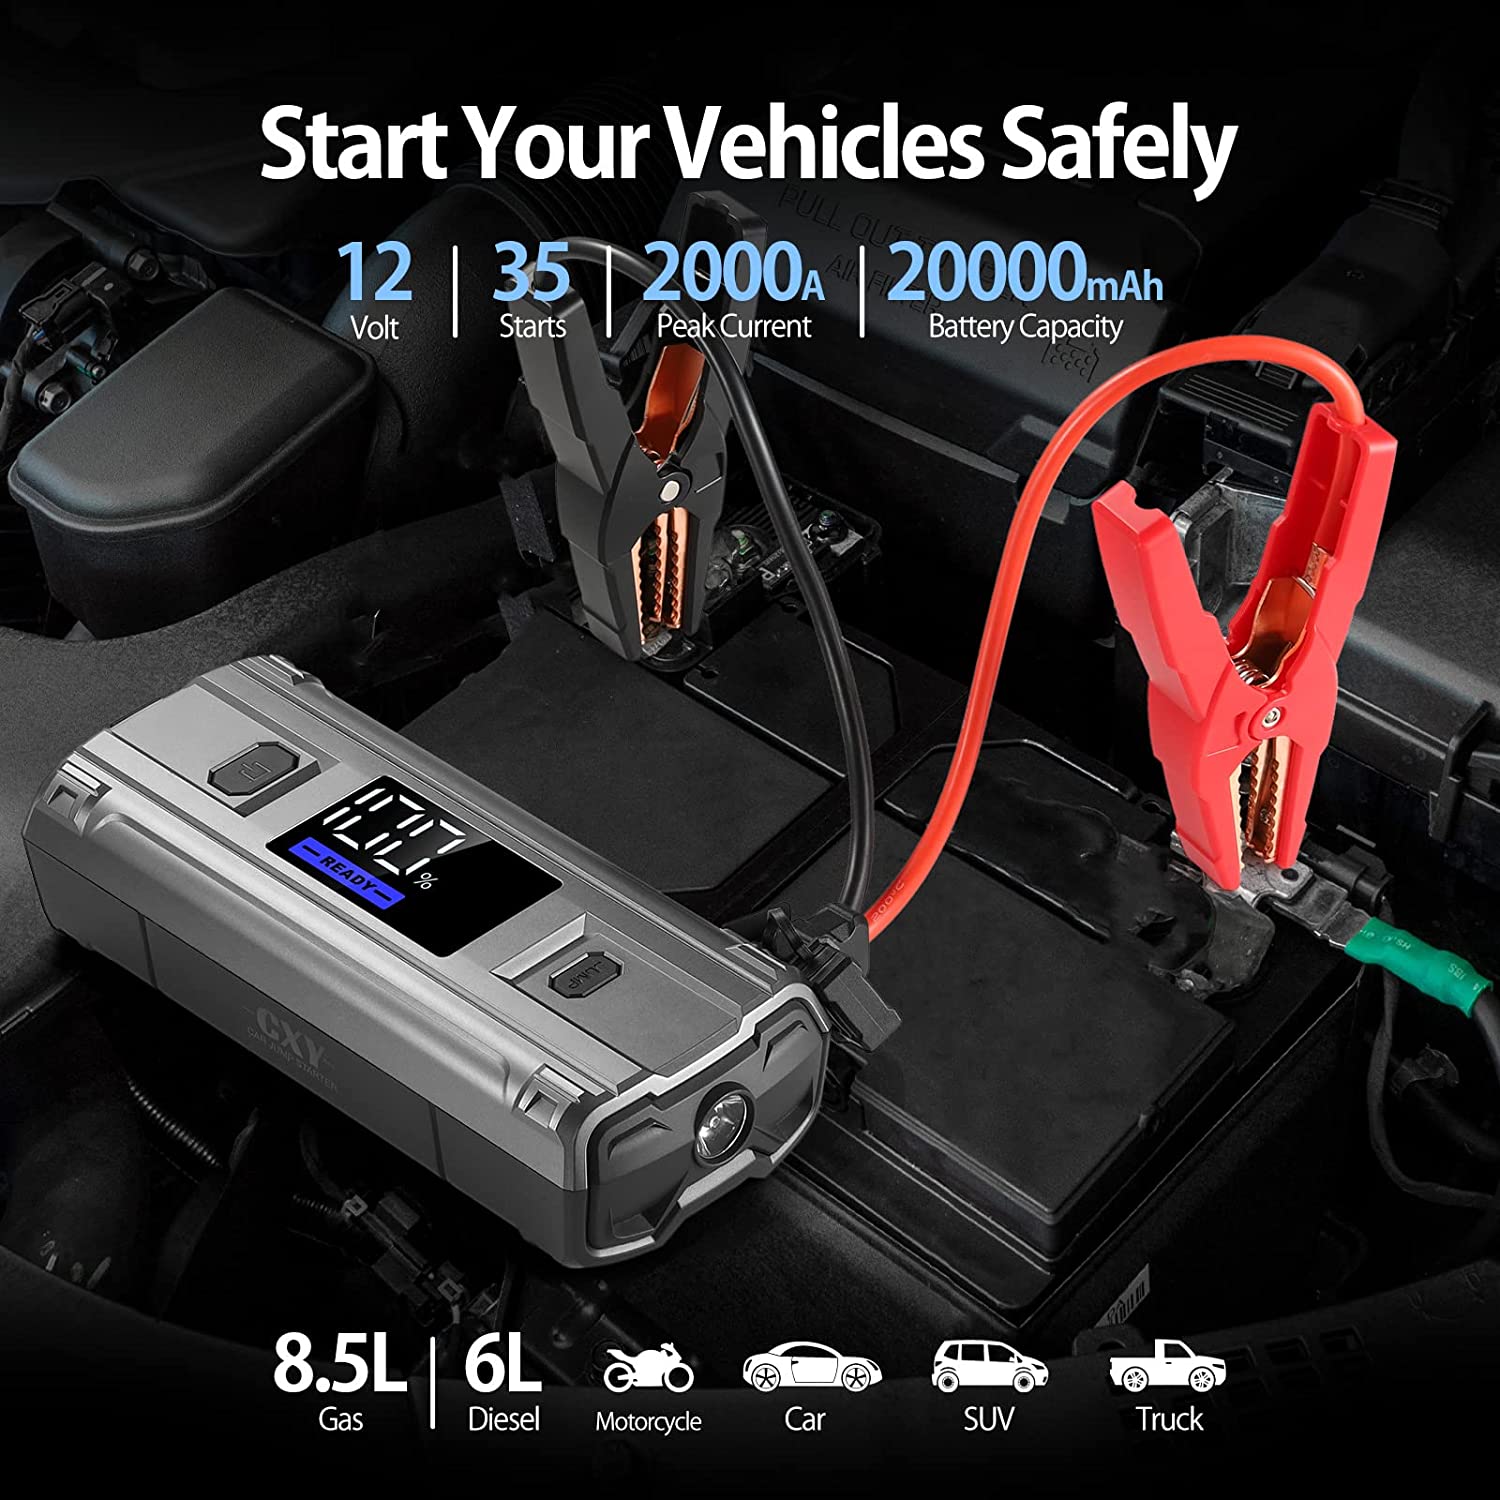  Car Jump Starter, 20000mAh 1500A Peak Battry Jump Starter for  up to 6L Gas or 3L Diesel Engine,Portable Power Bank Charger with Type-C  Fast Charging, Smart Safety Jumper Cable, LED Light